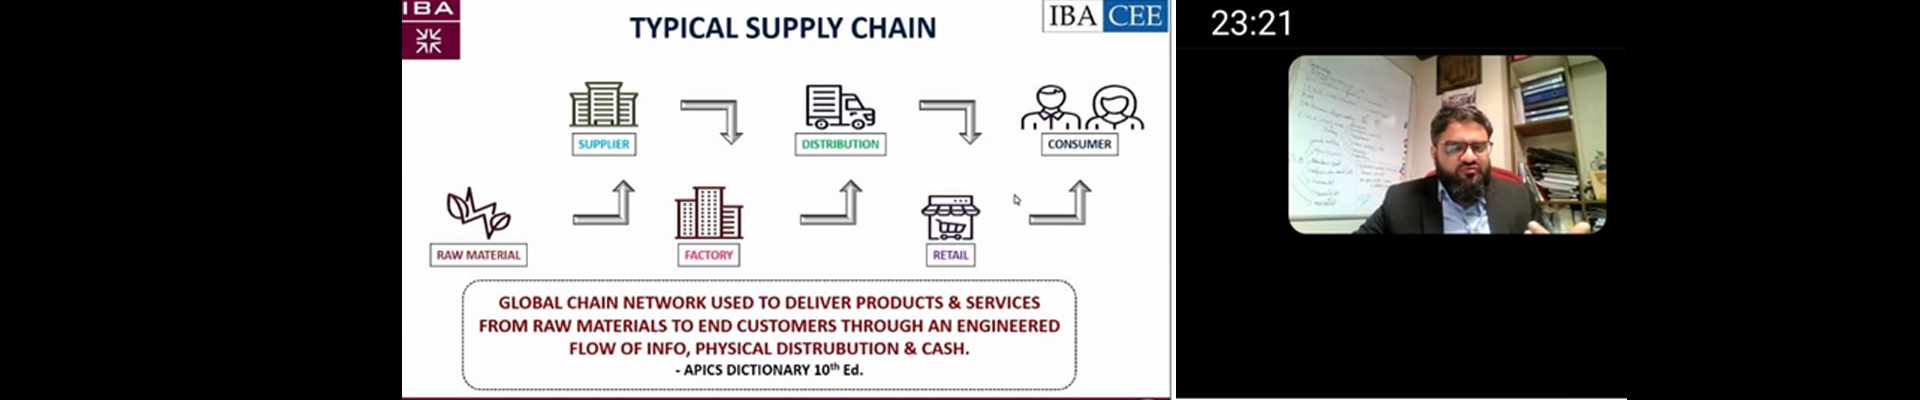 Training on Supply Chain Management as a Career Path